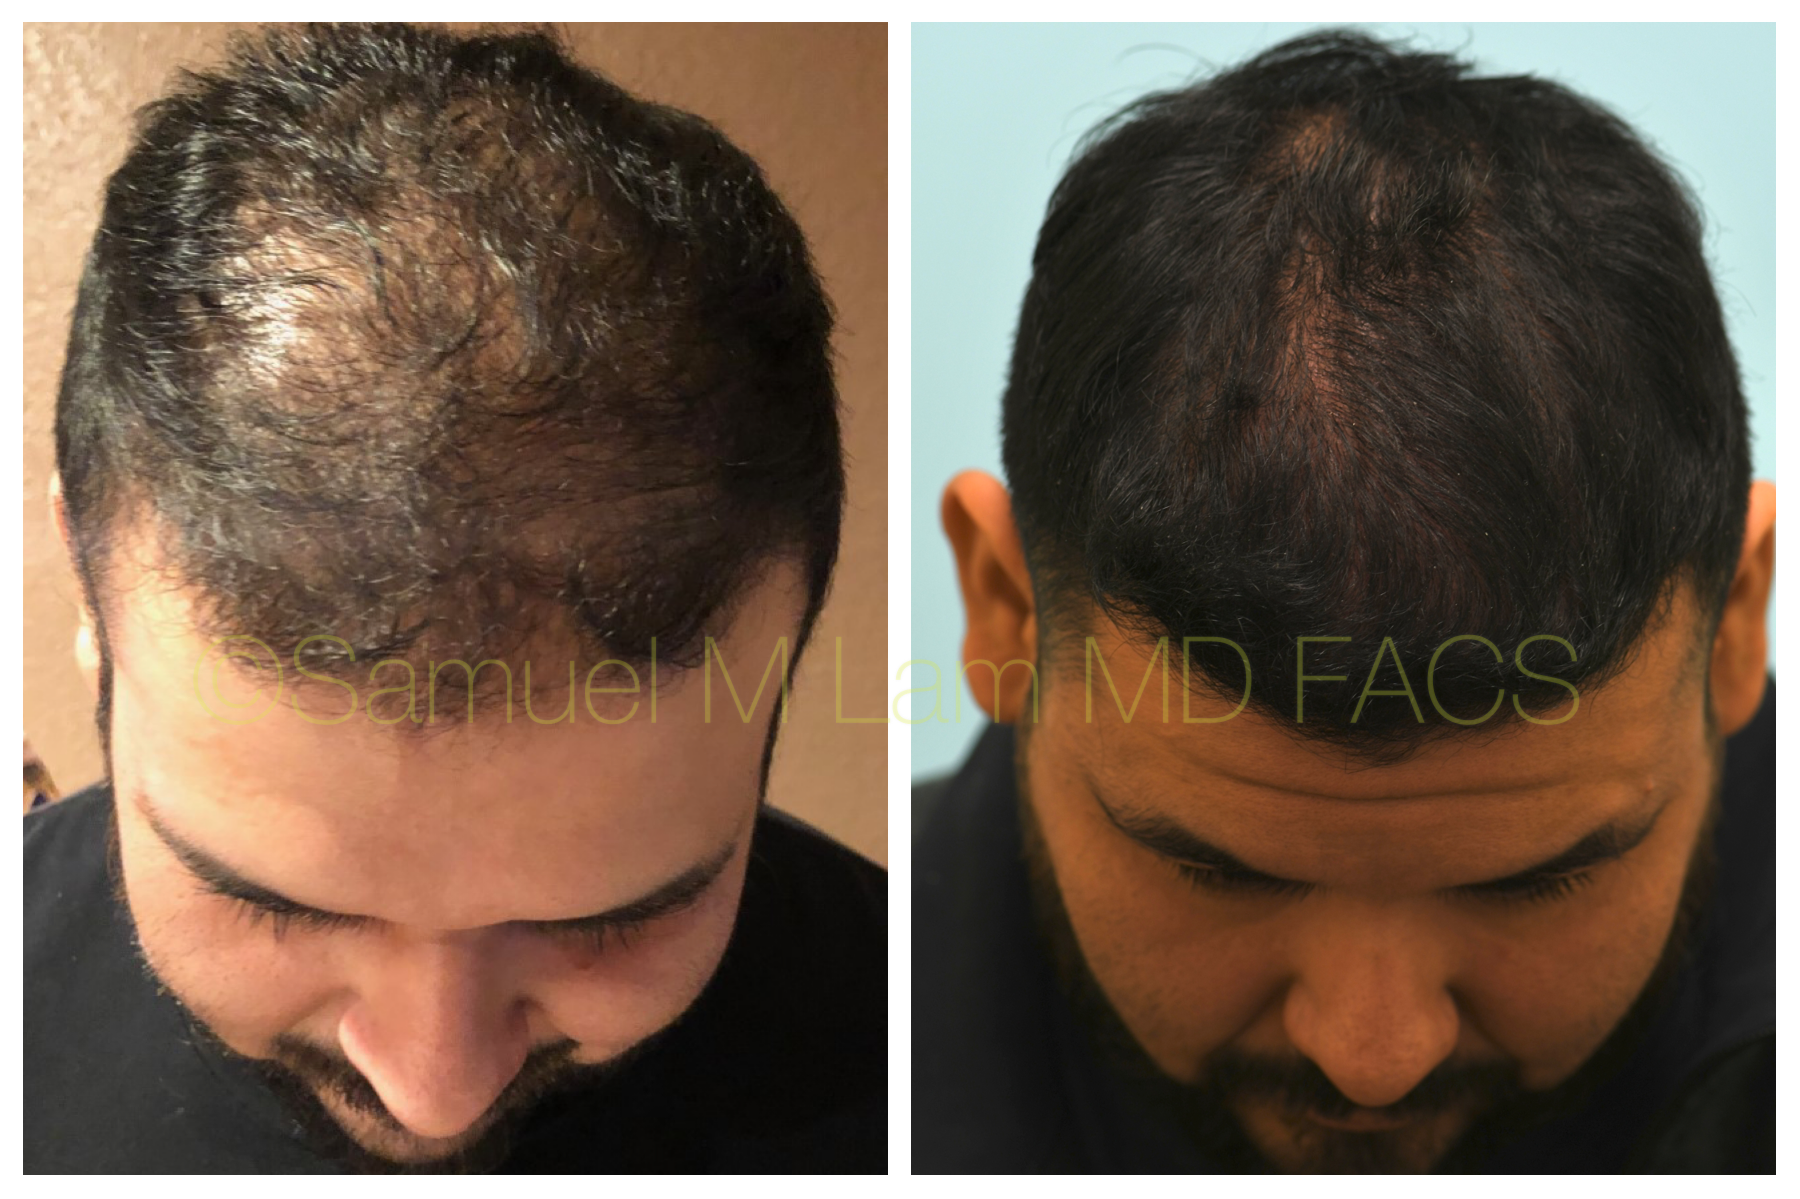 Dallas Finasteride and Minoxidil Before and After Photos - Plano Plastic  Surgery Photo Gallery - Dr. Samuel LamFinasteride and Minoxidil Archives |  Lam, Sam ()